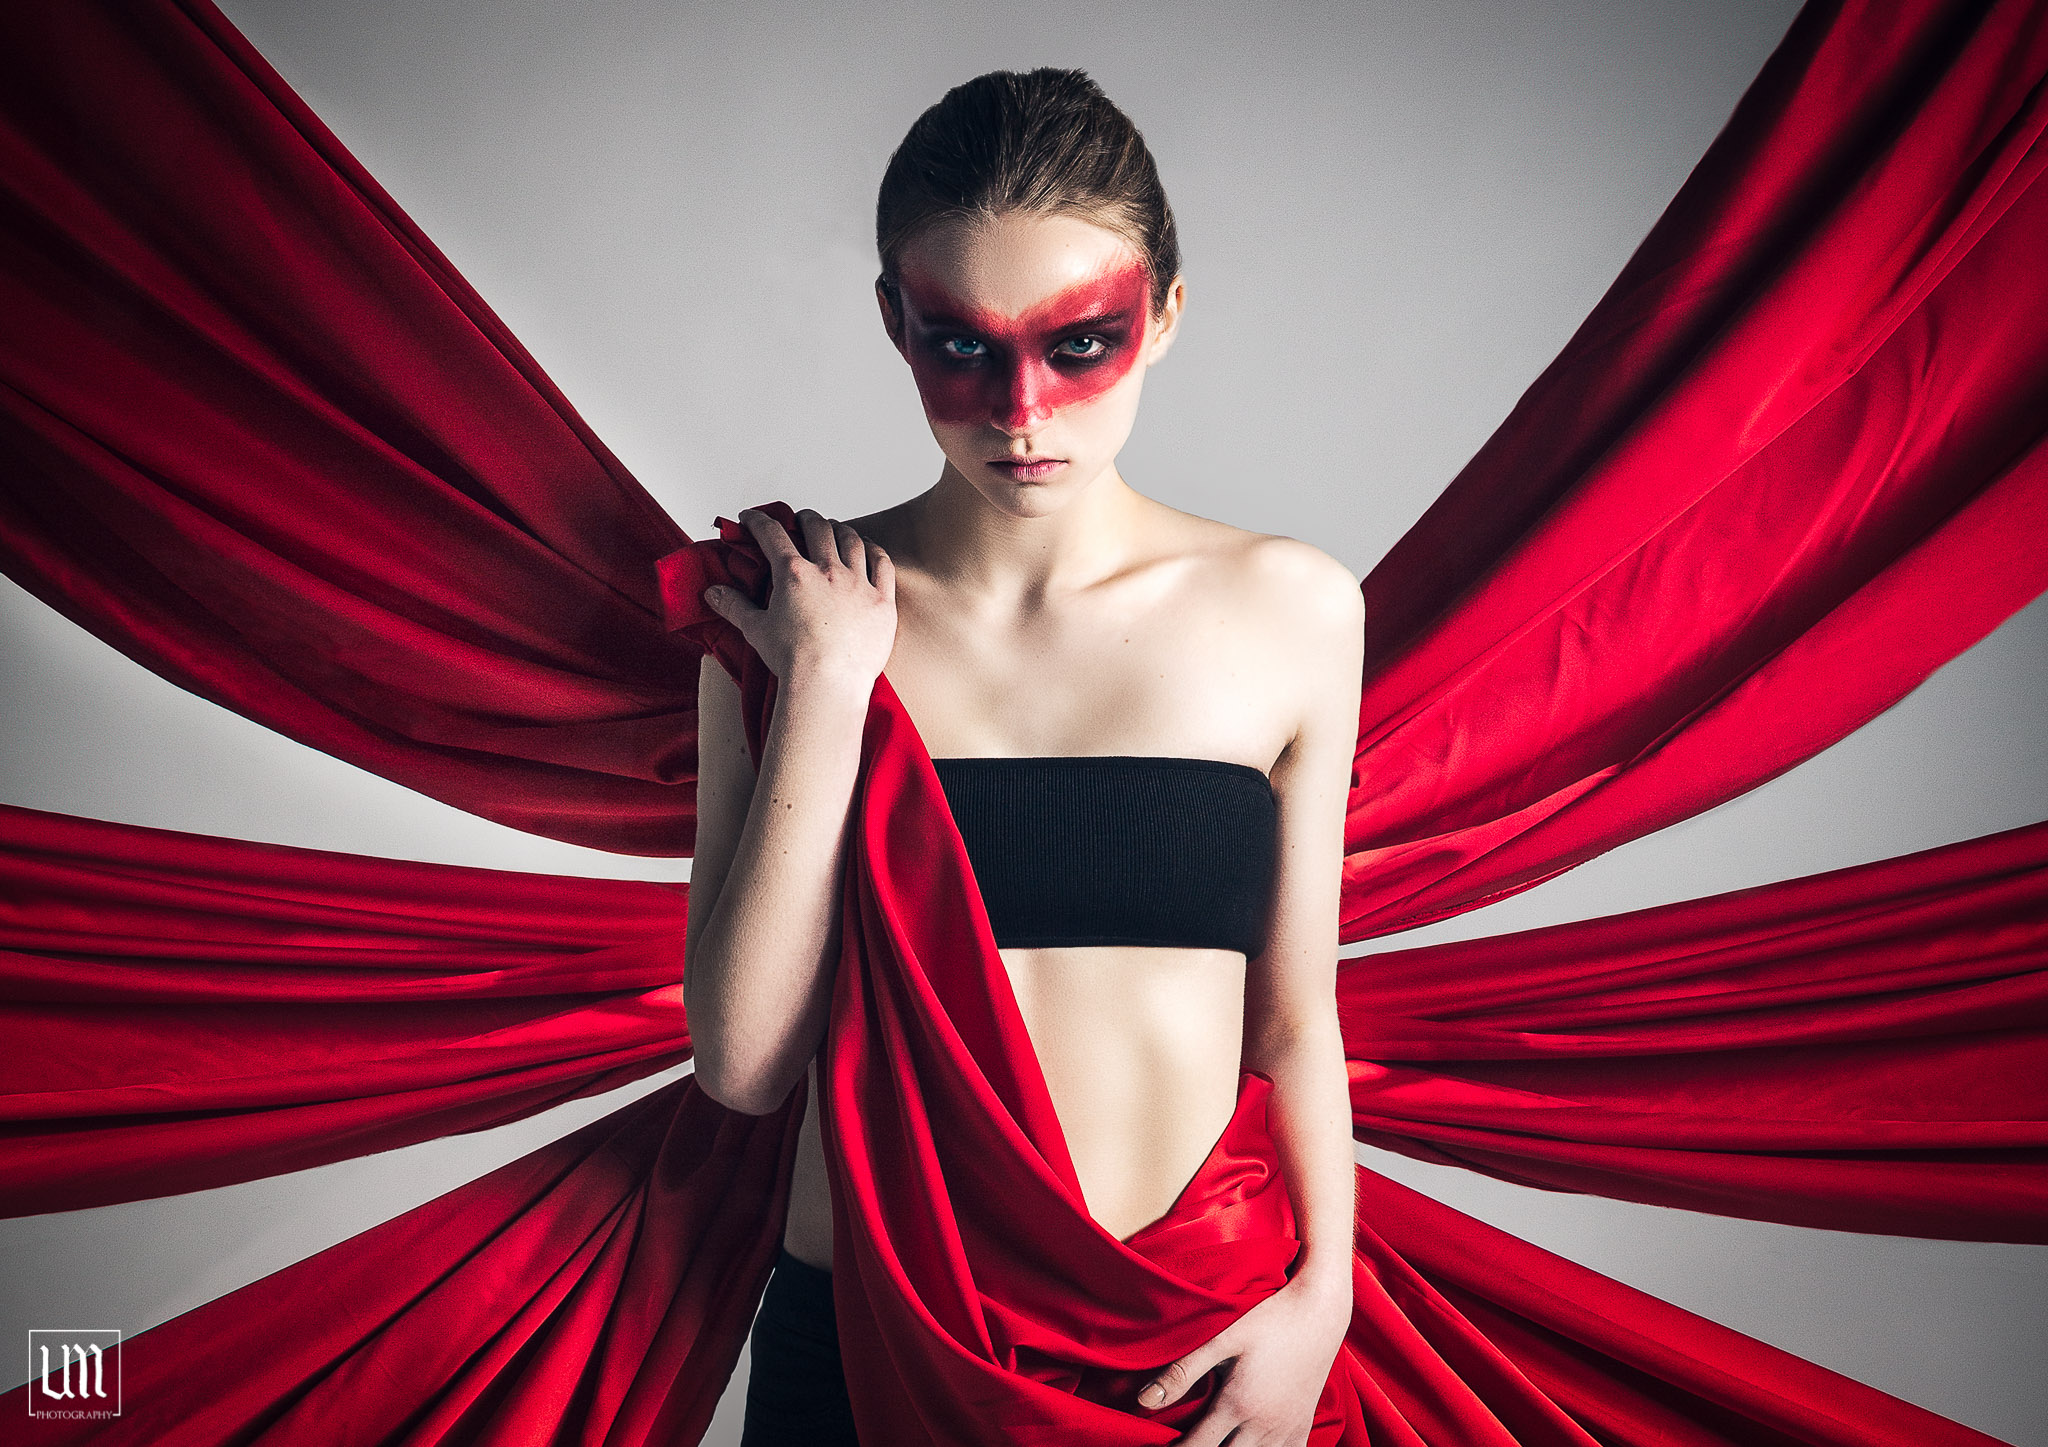 Vermillion Vision with Jeb McConnell of Ursus Media. Makeup by Amanda Marsala